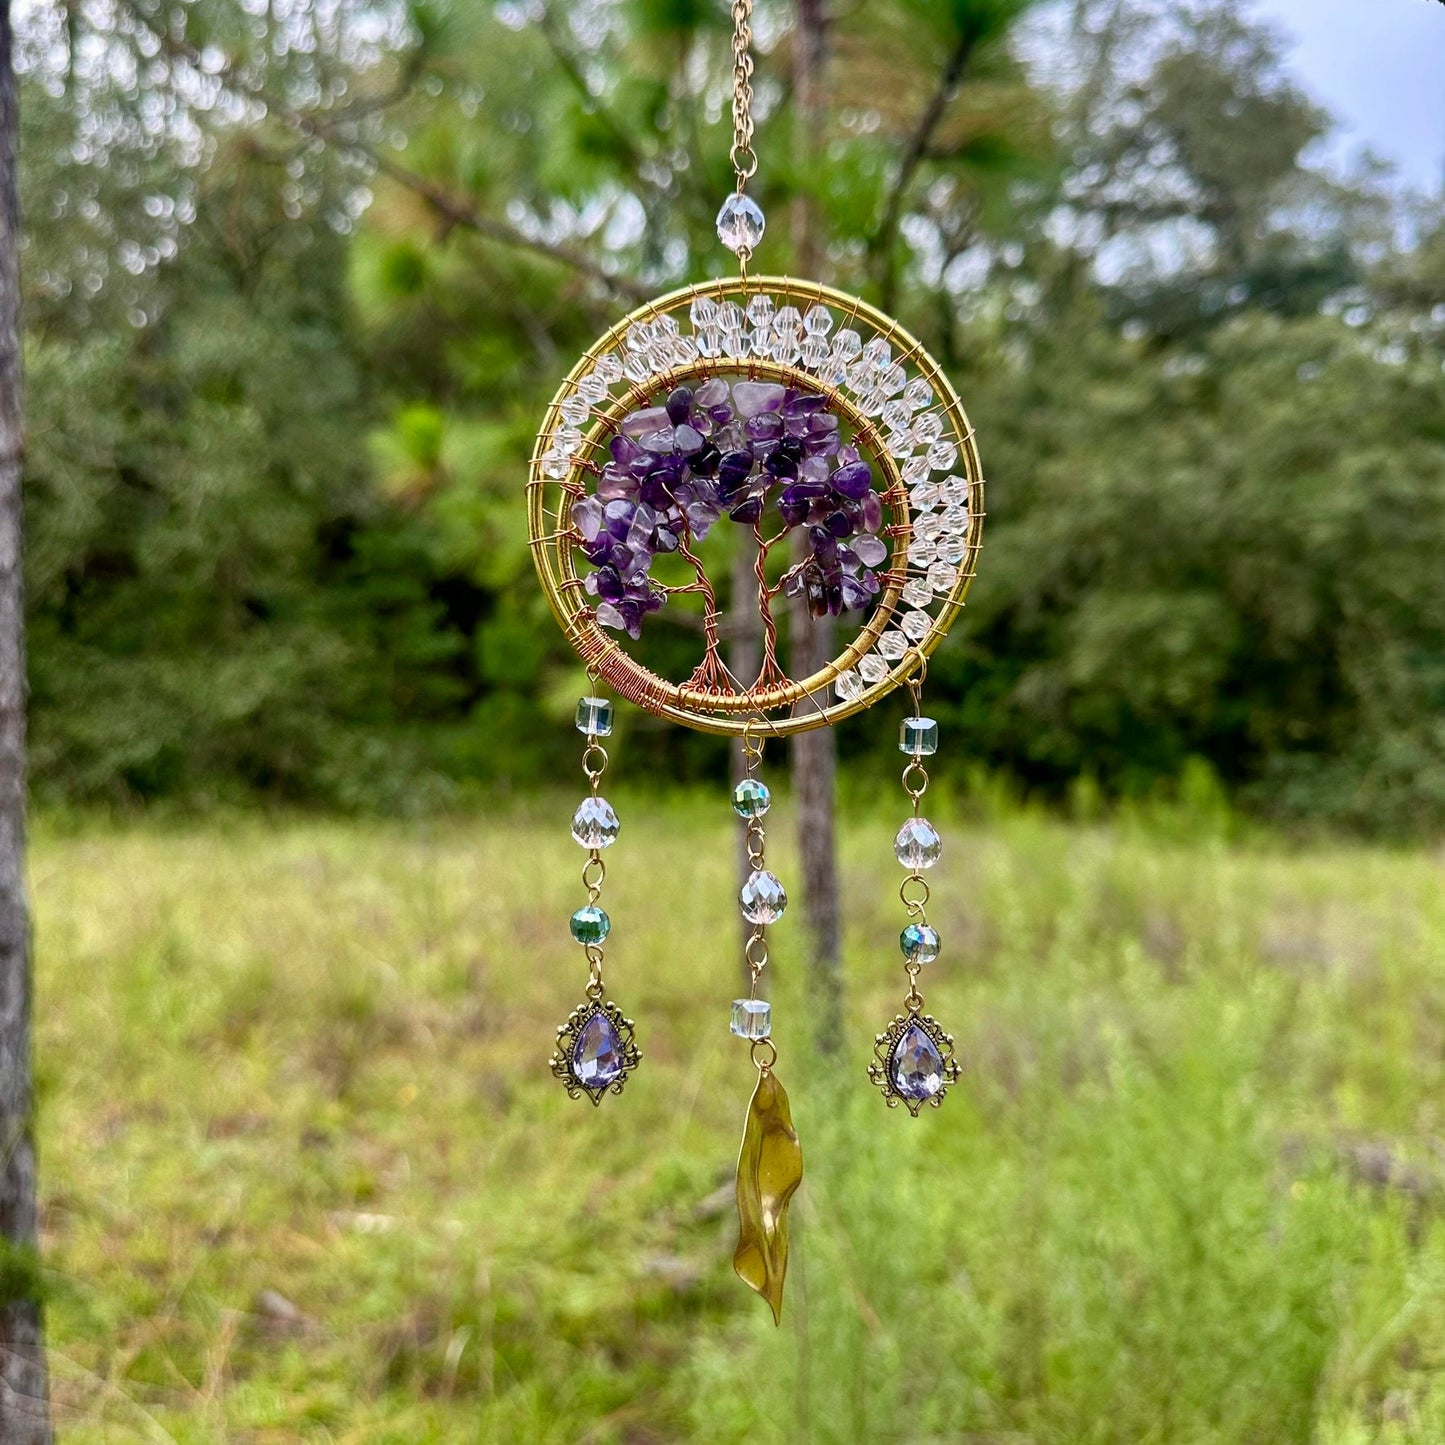 Gold Metal Dual Ring Dreamcatcher with 2 Trees of Life Amethyst Stones & Hanging Jewel Charms  -- Rearview Mirror Hanging or Wall Hanging